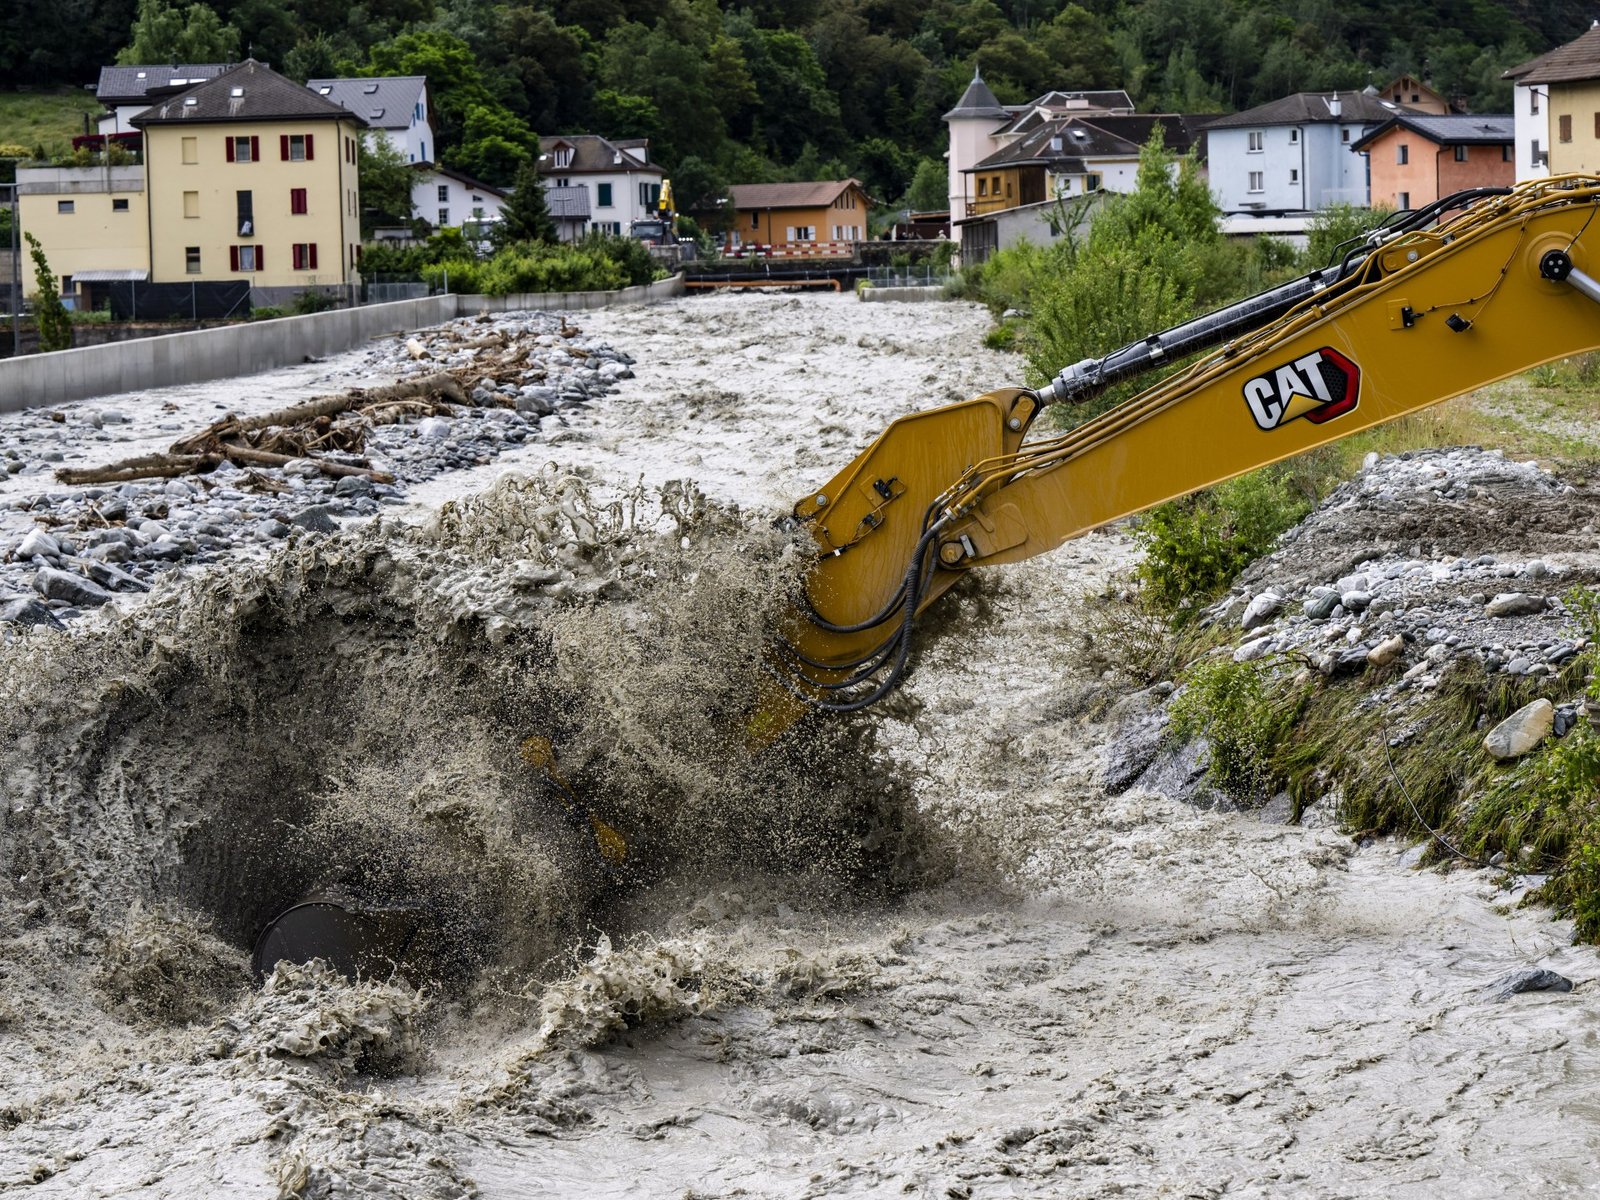 3 missing in a landslide in Swiss Alps as heavy rains cause flash floods | Floods News